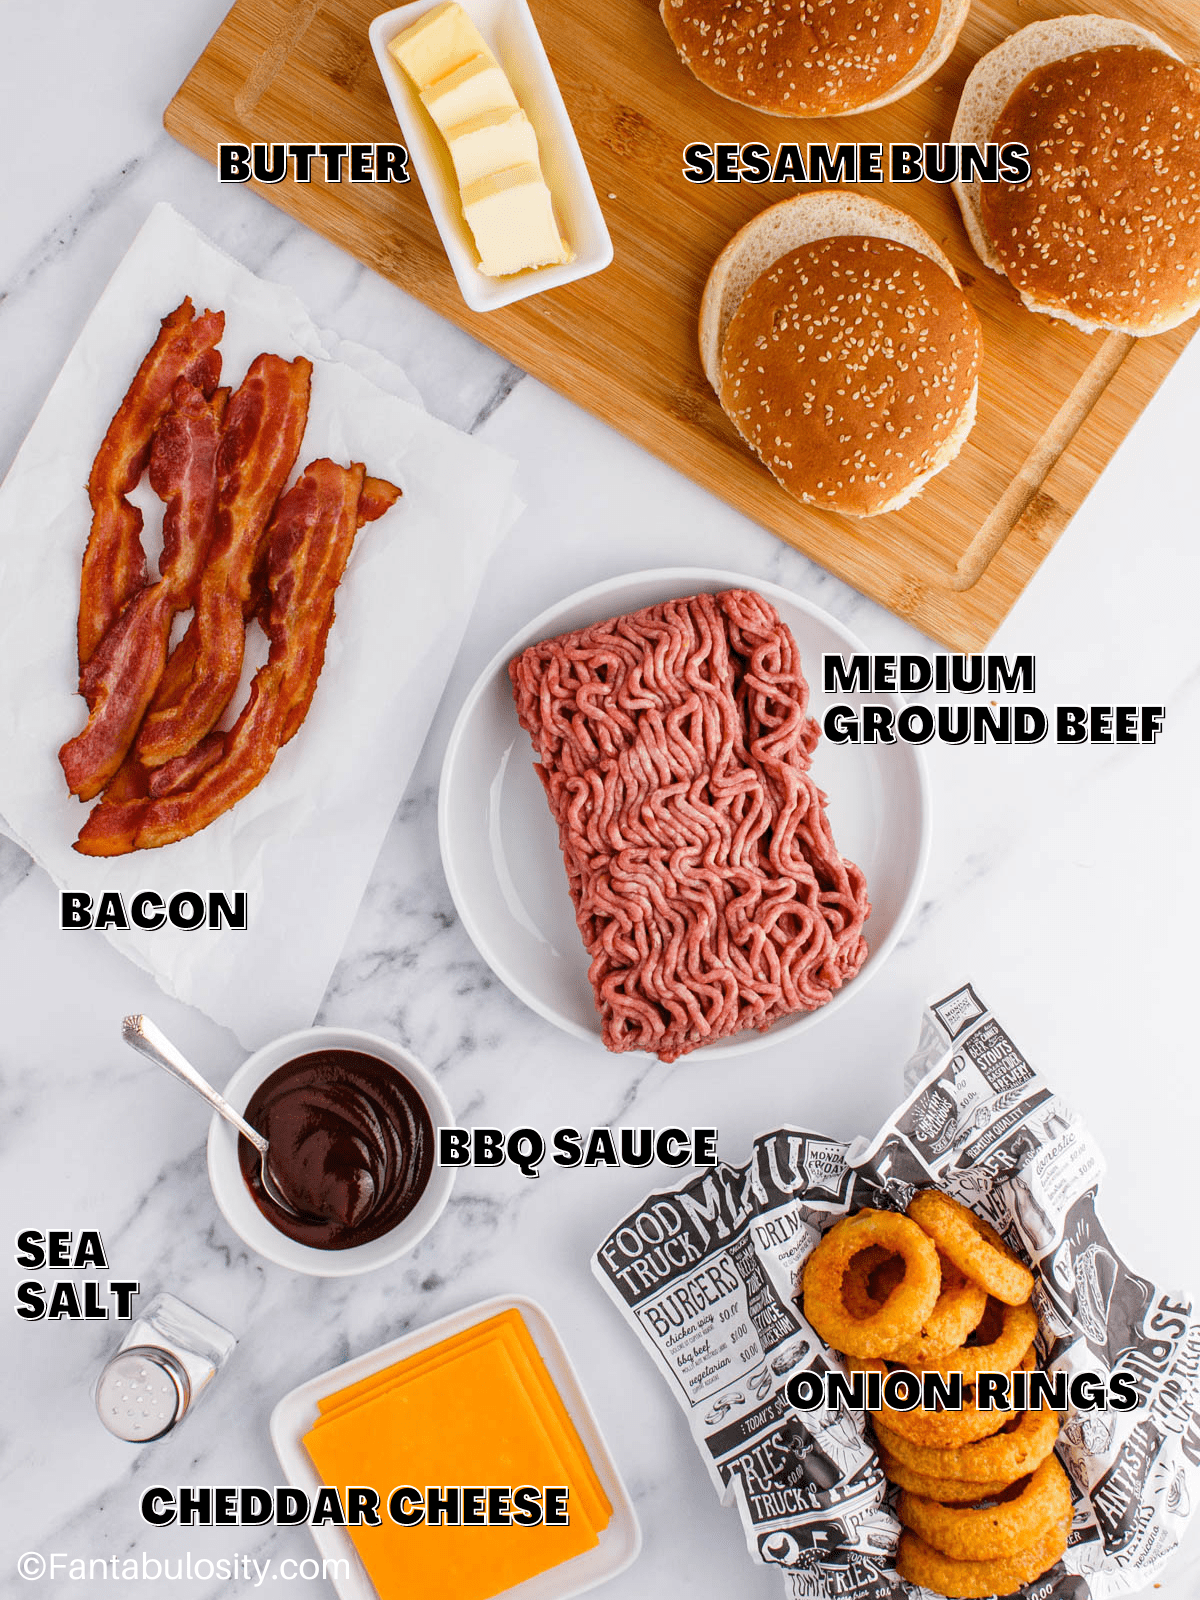 The ingredients for cowboy burgers laid out with labels on the image.